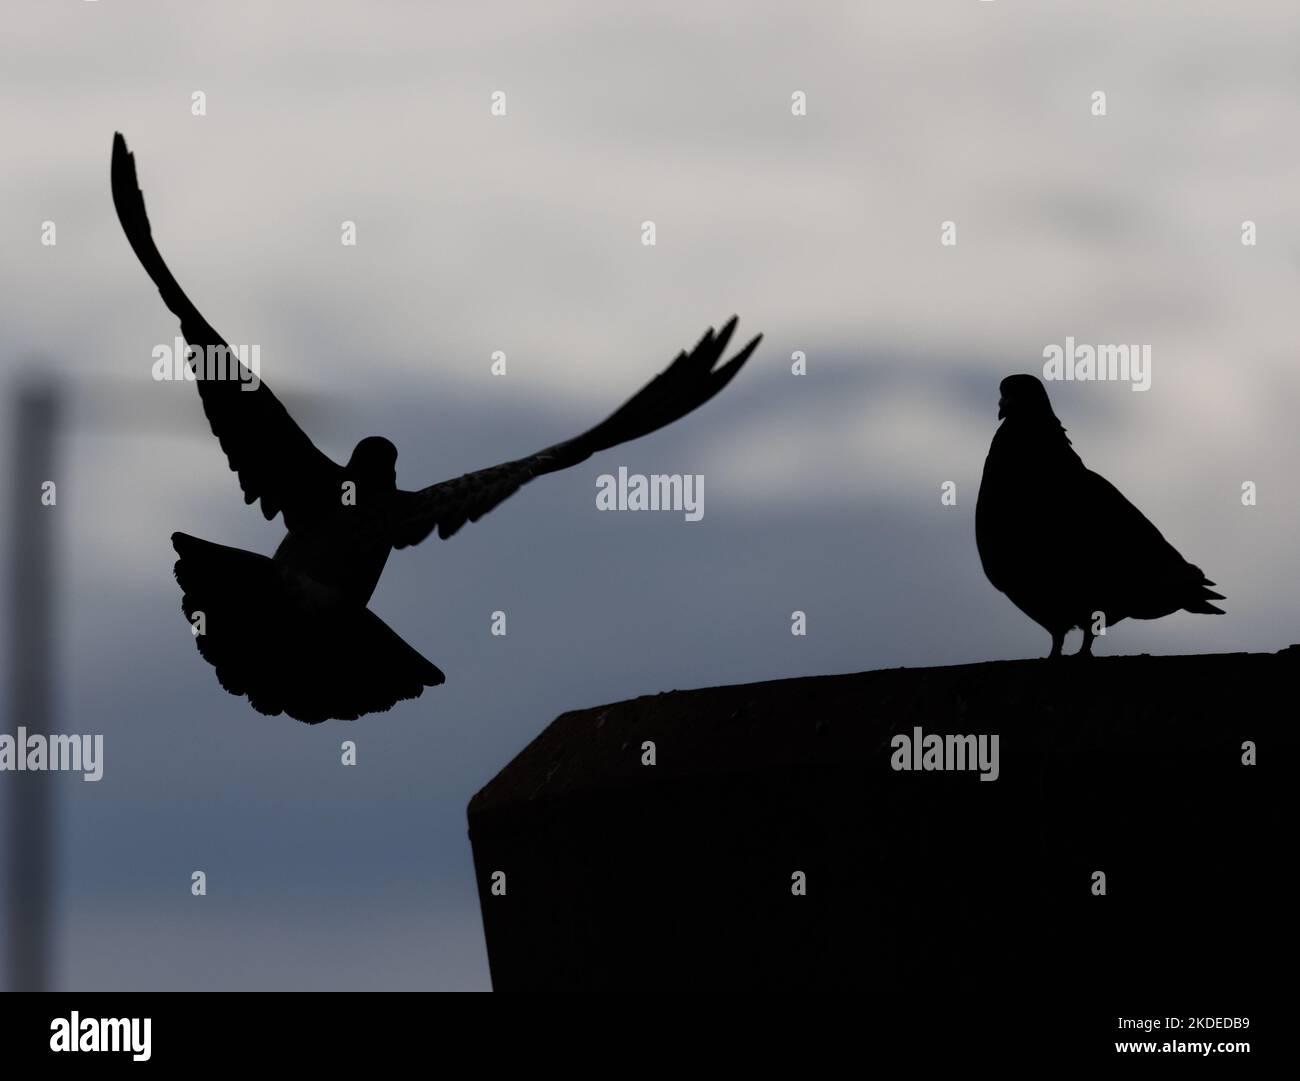 Silhouette of pigeons, one in flight in urban setting Stock Photo